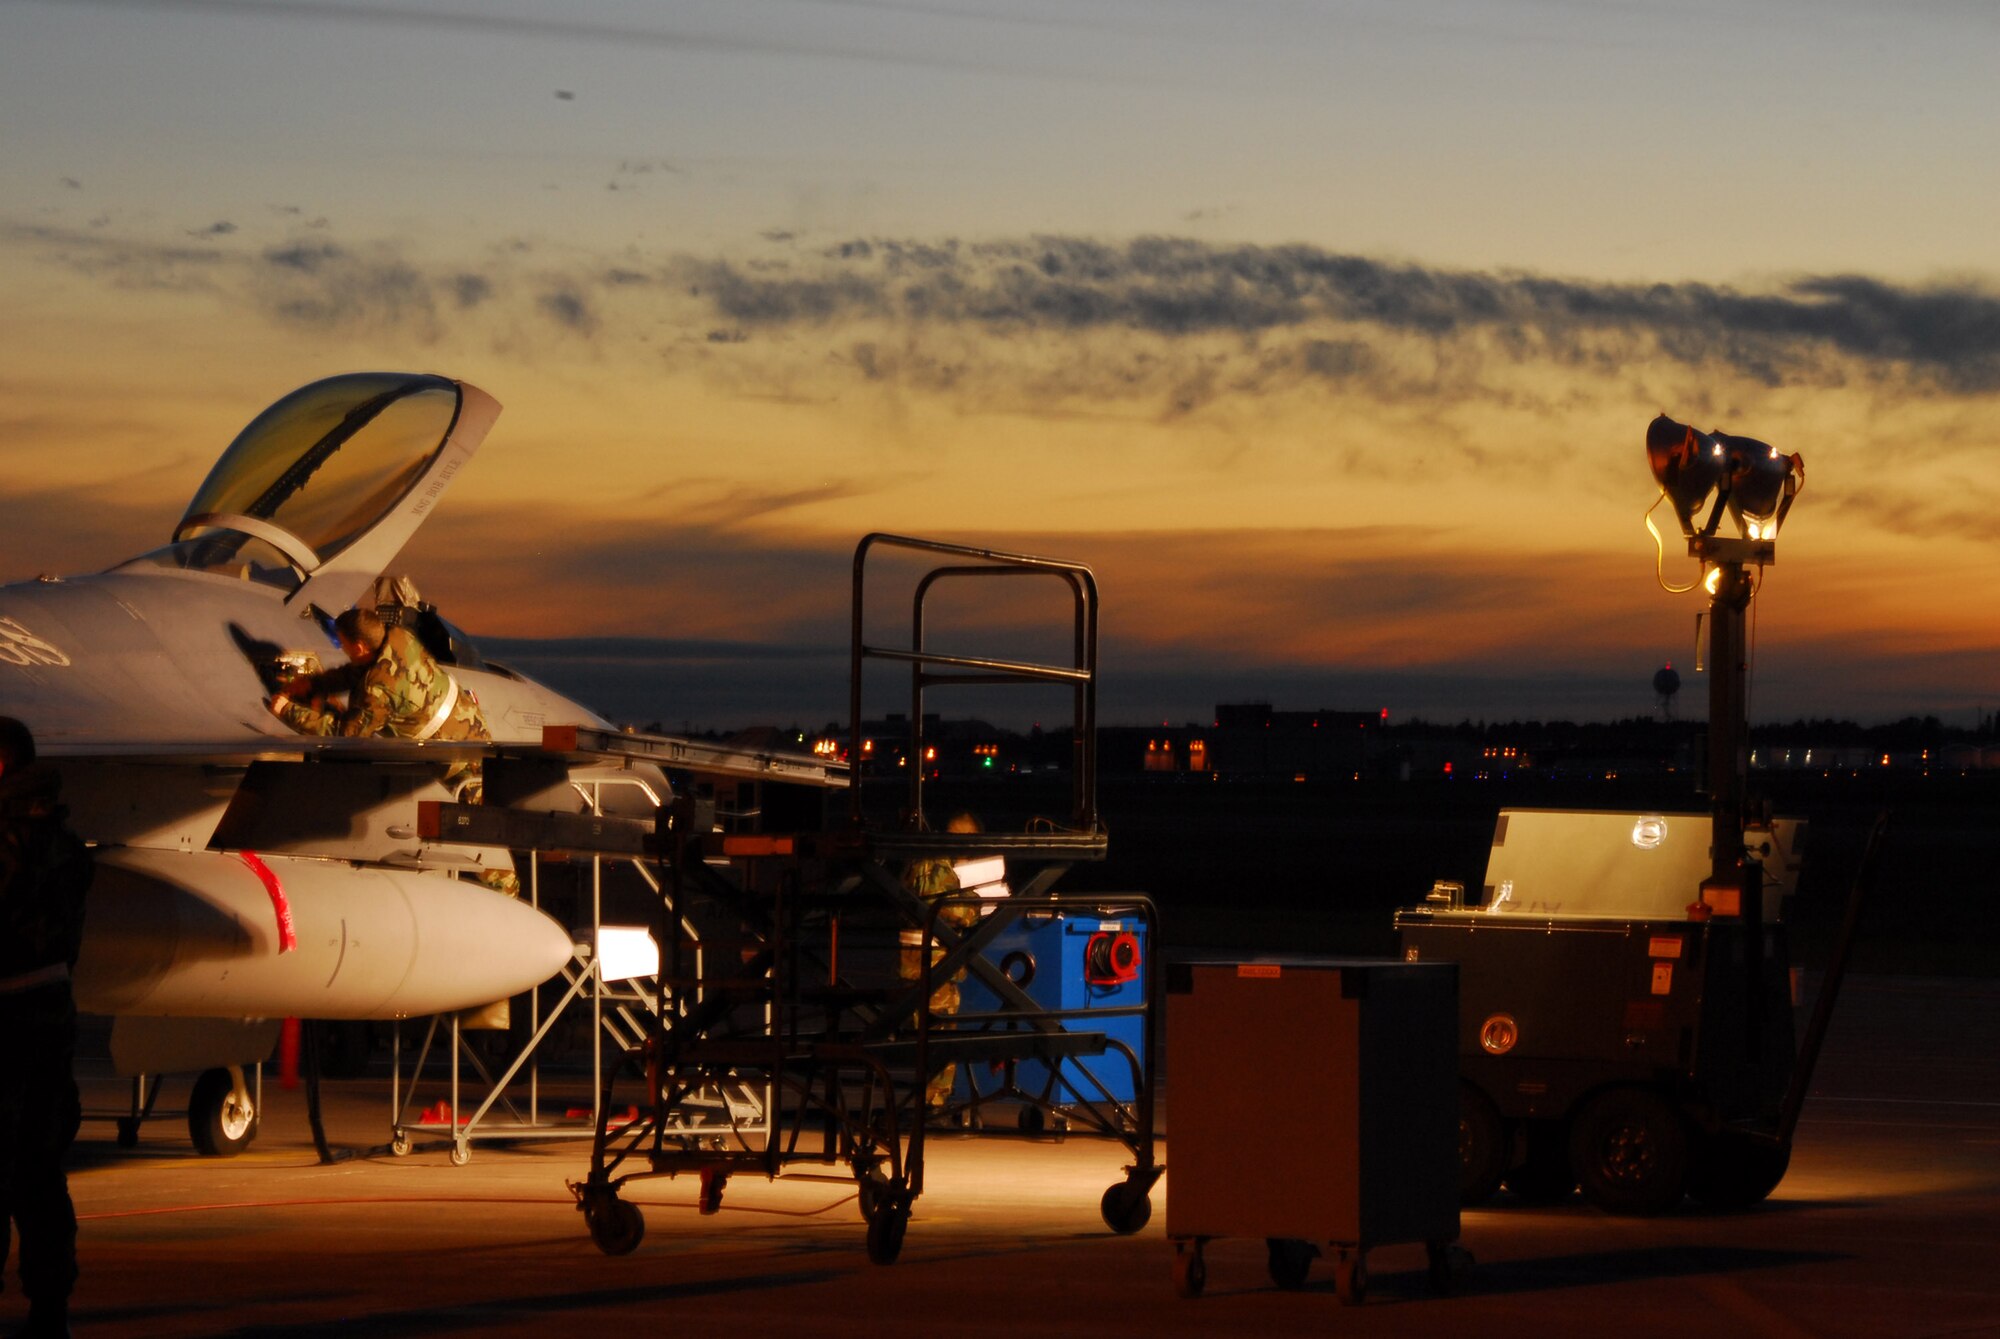 A member of the 148th Fighter Wing works on an F-16 Fighting Falcon during an October 2007 Operational Readiness Exercise in Duluth, Minn. The 148th FW was selected by Occupational Health and Safety Administration officials for the Voluntary Protection Program Star Award. (U.S. Air Force photo/Staff Sgt. Don Action)
